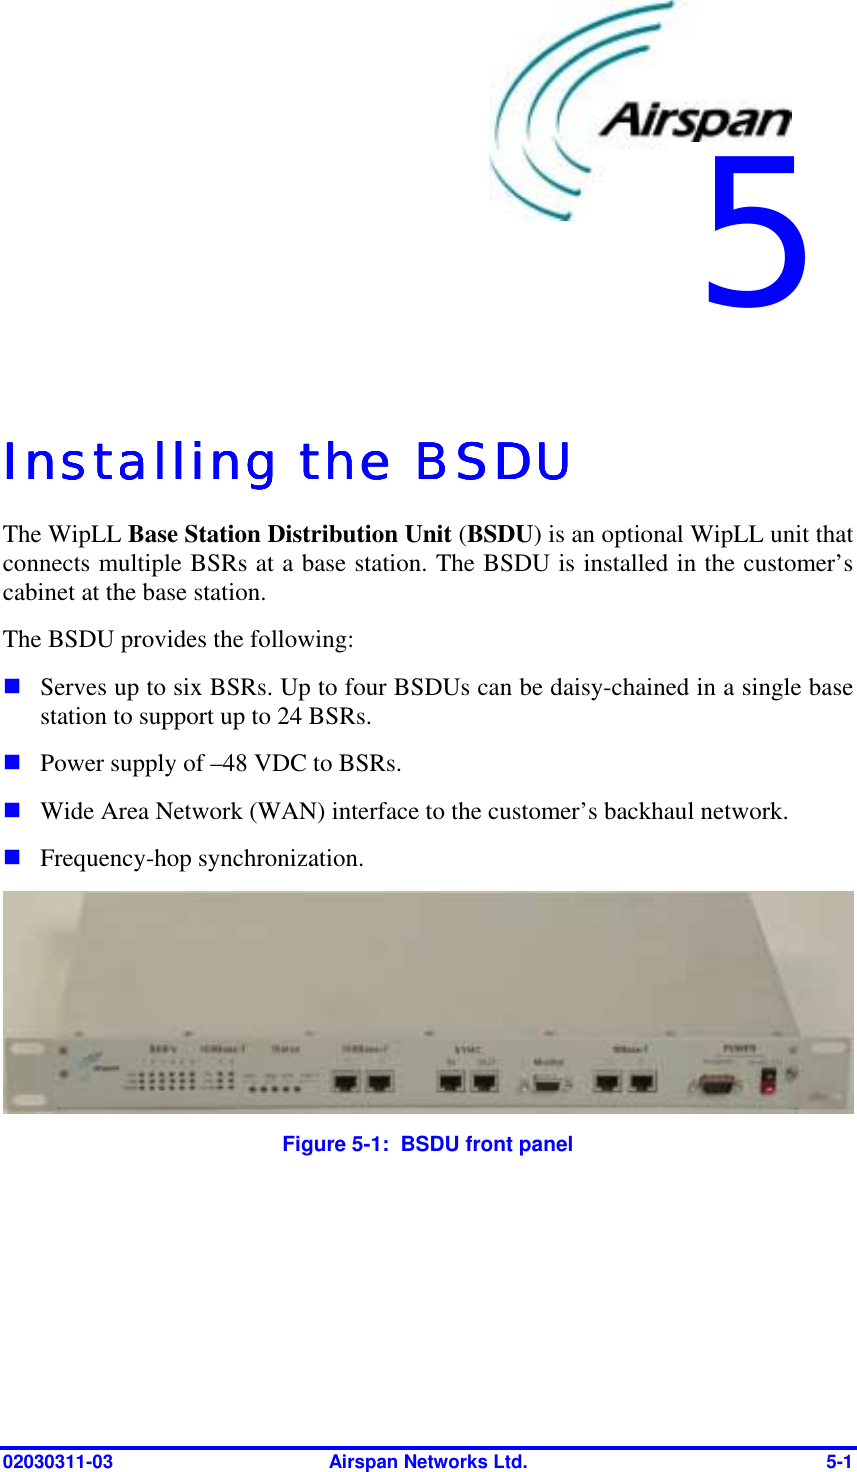  02030311-03  Airspan Networks Ltd.  5-1   Installing the BSDUInstalling the BSDUInstalling the BSDUInstalling the BSDU    The WipLL Base Station Distribution Unit (BSDU) is an optional WipLL unit that connects multiple BSRs at a base station. The BSDU is installed in the customer’s cabinet at the base station.  The BSDU provides the following: ! Serves up to six BSRs. Up to four BSDUs can be daisy-chained in a single base station to support up to 24 BSRs. ! Power supply of –48 VDC to BSRs.  ! Wide Area Network (WAN) interface to the customer’s backhaul network. ! Frequency-hop synchronization.  Figure  5-1:  BSDU front panel  5 